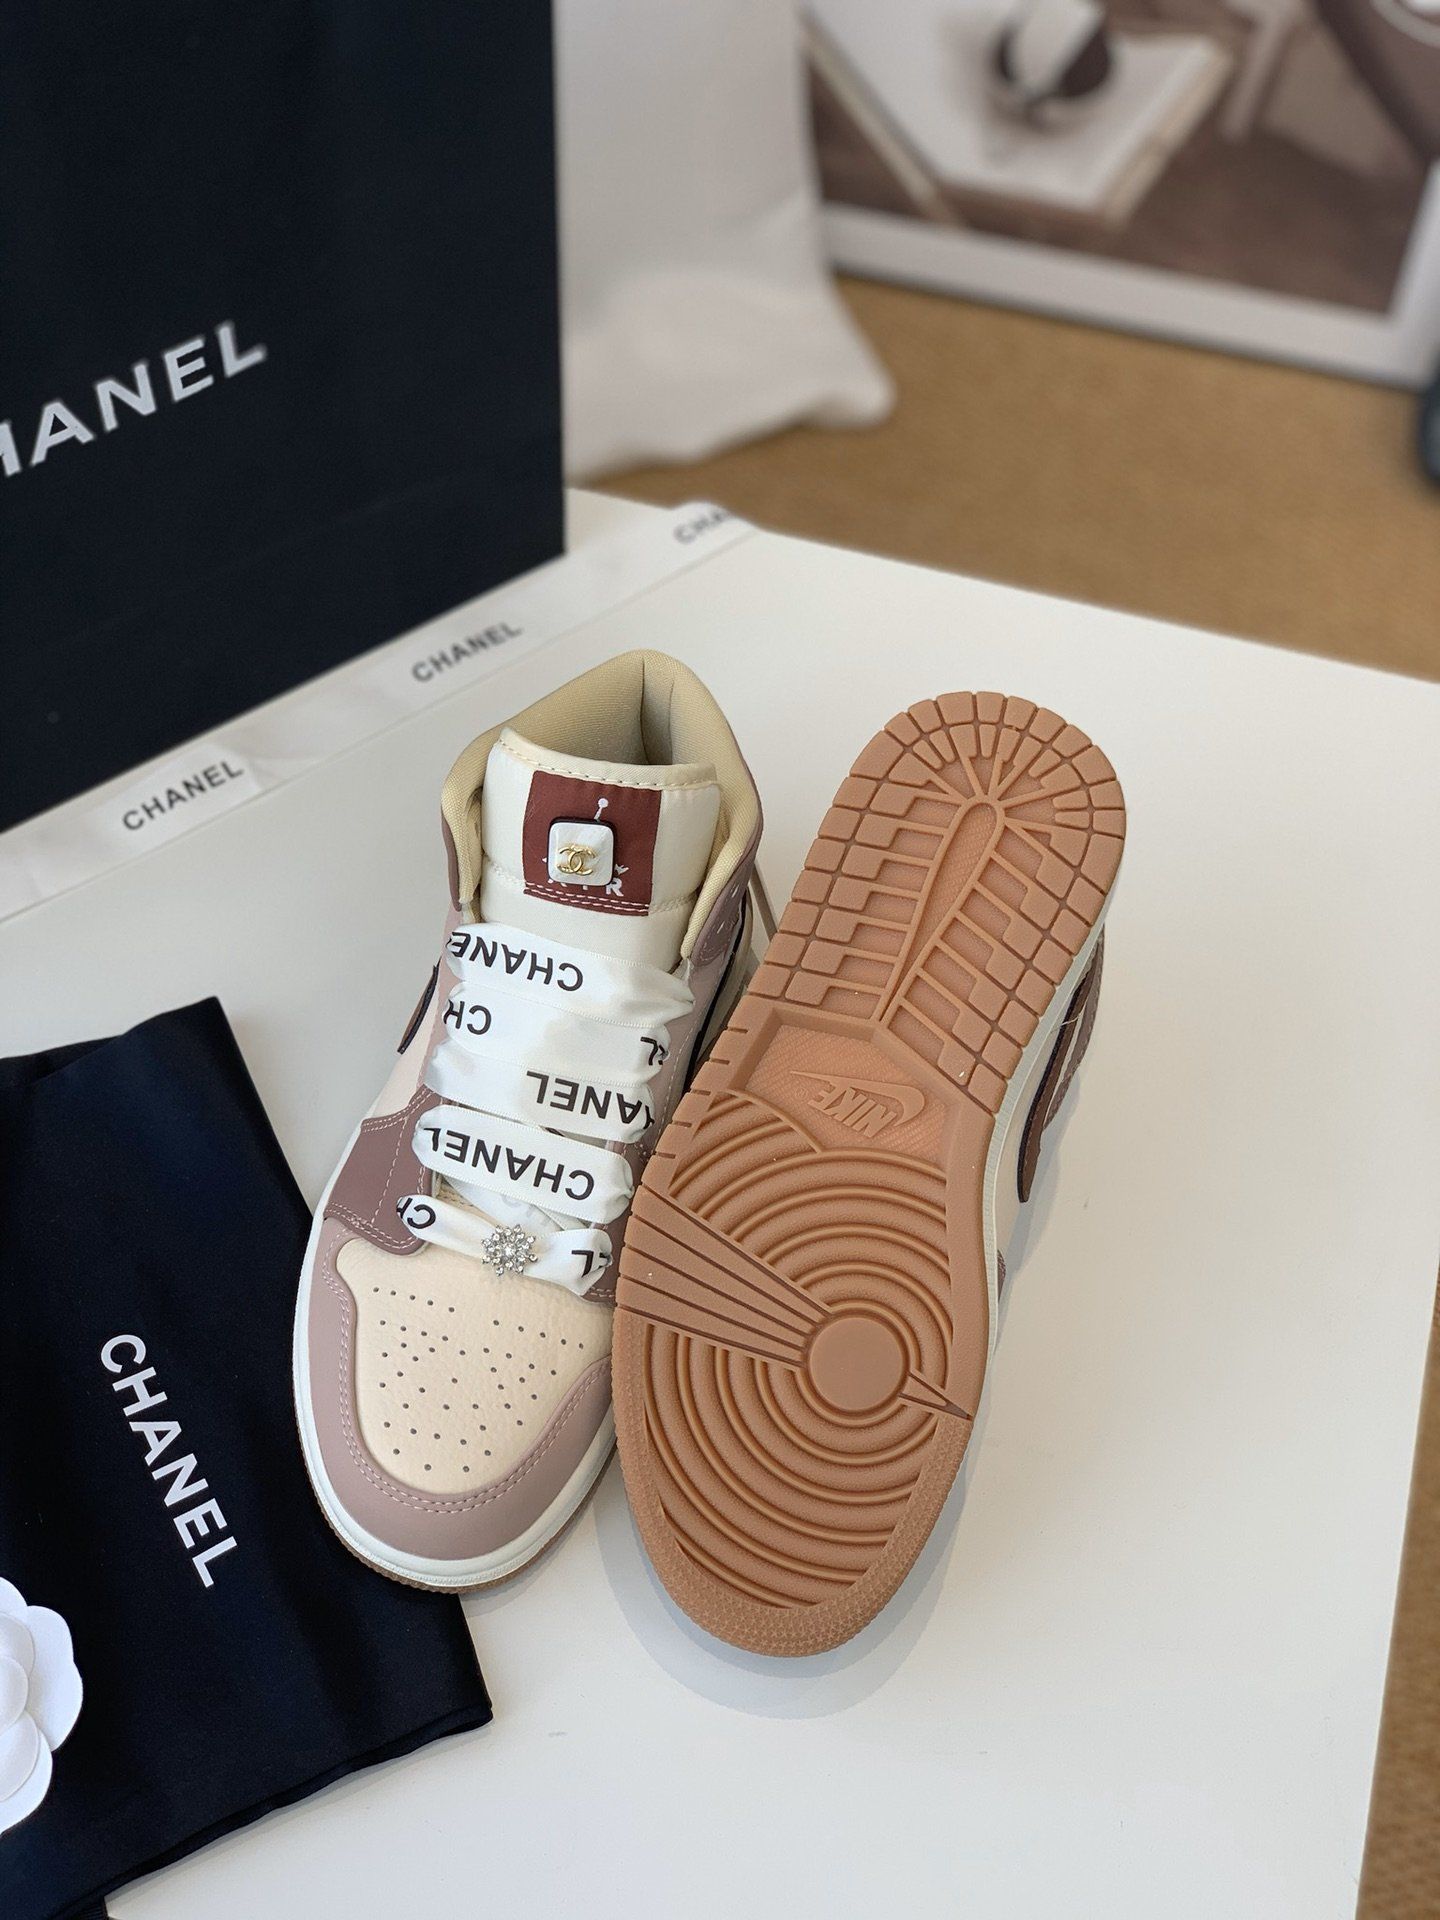 Chanel shoes CH00193